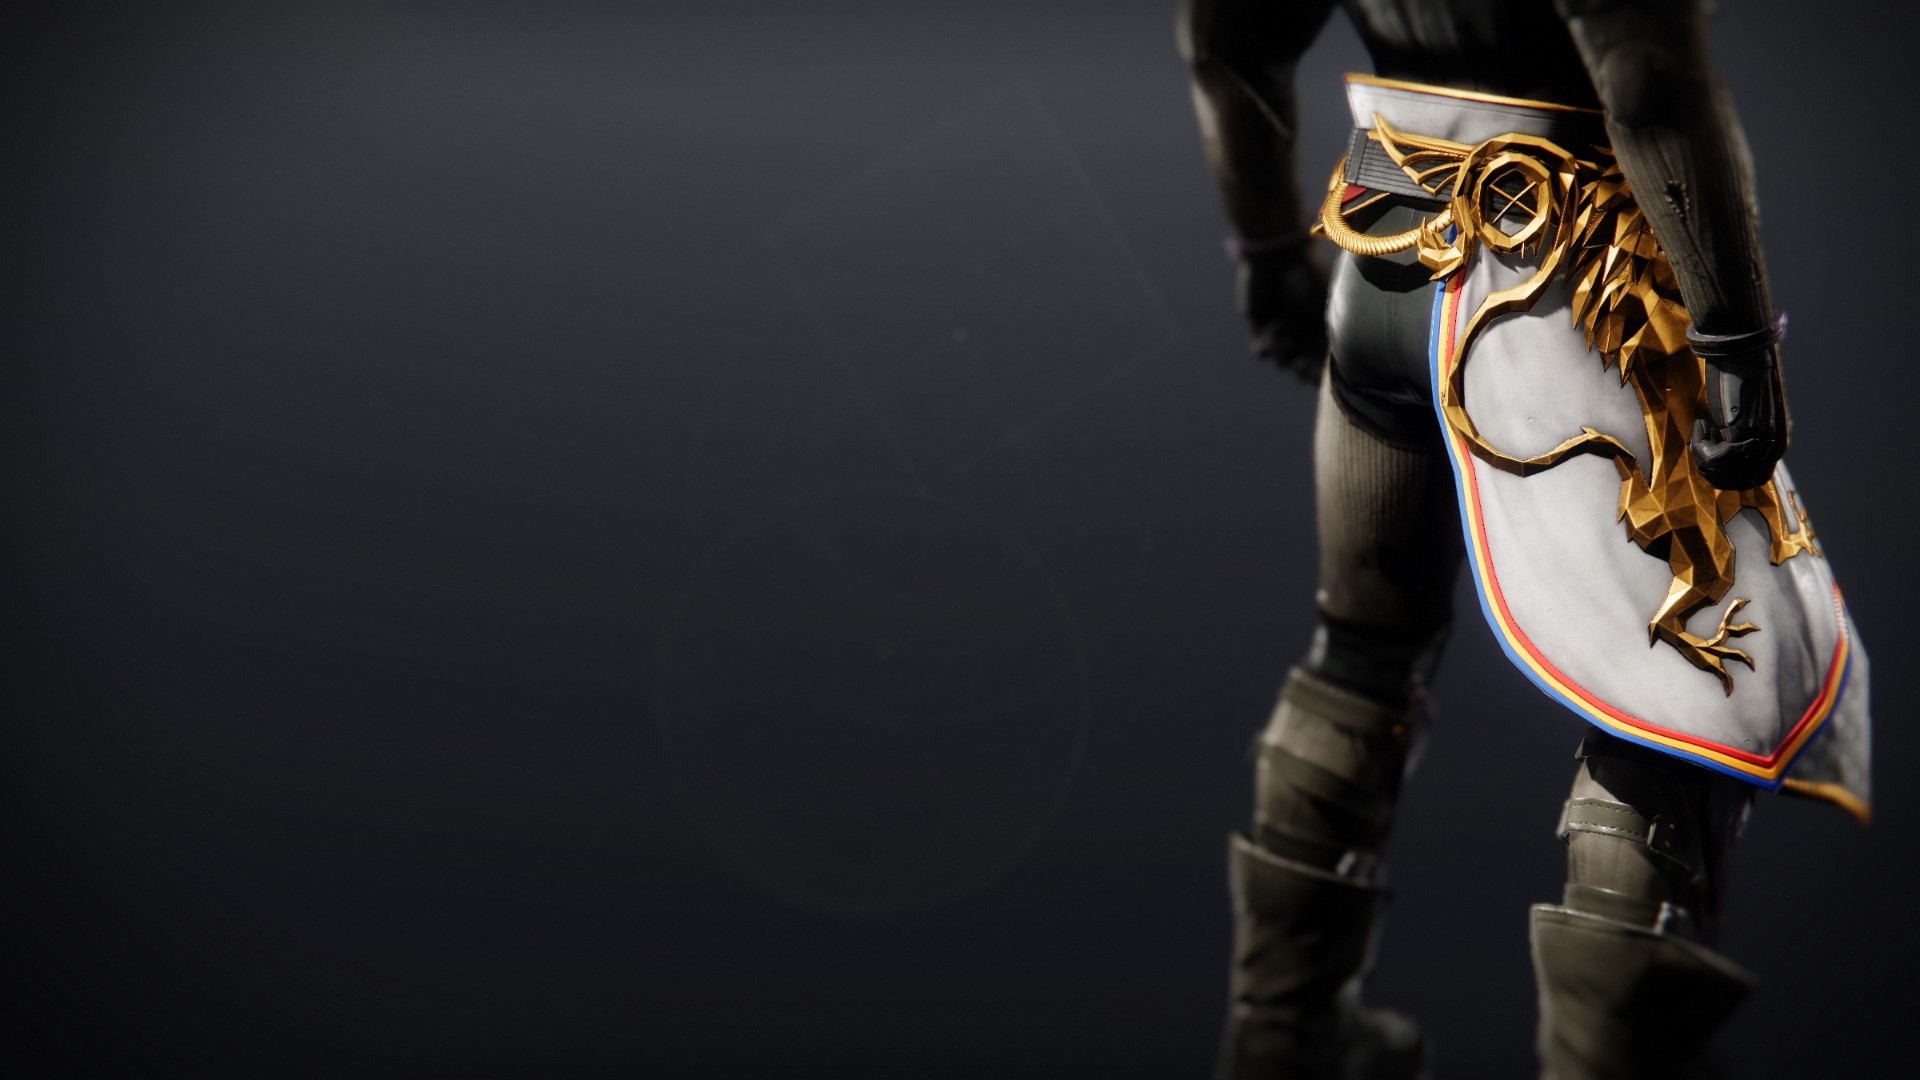 An in-game render of the Lion's Reign Mark.